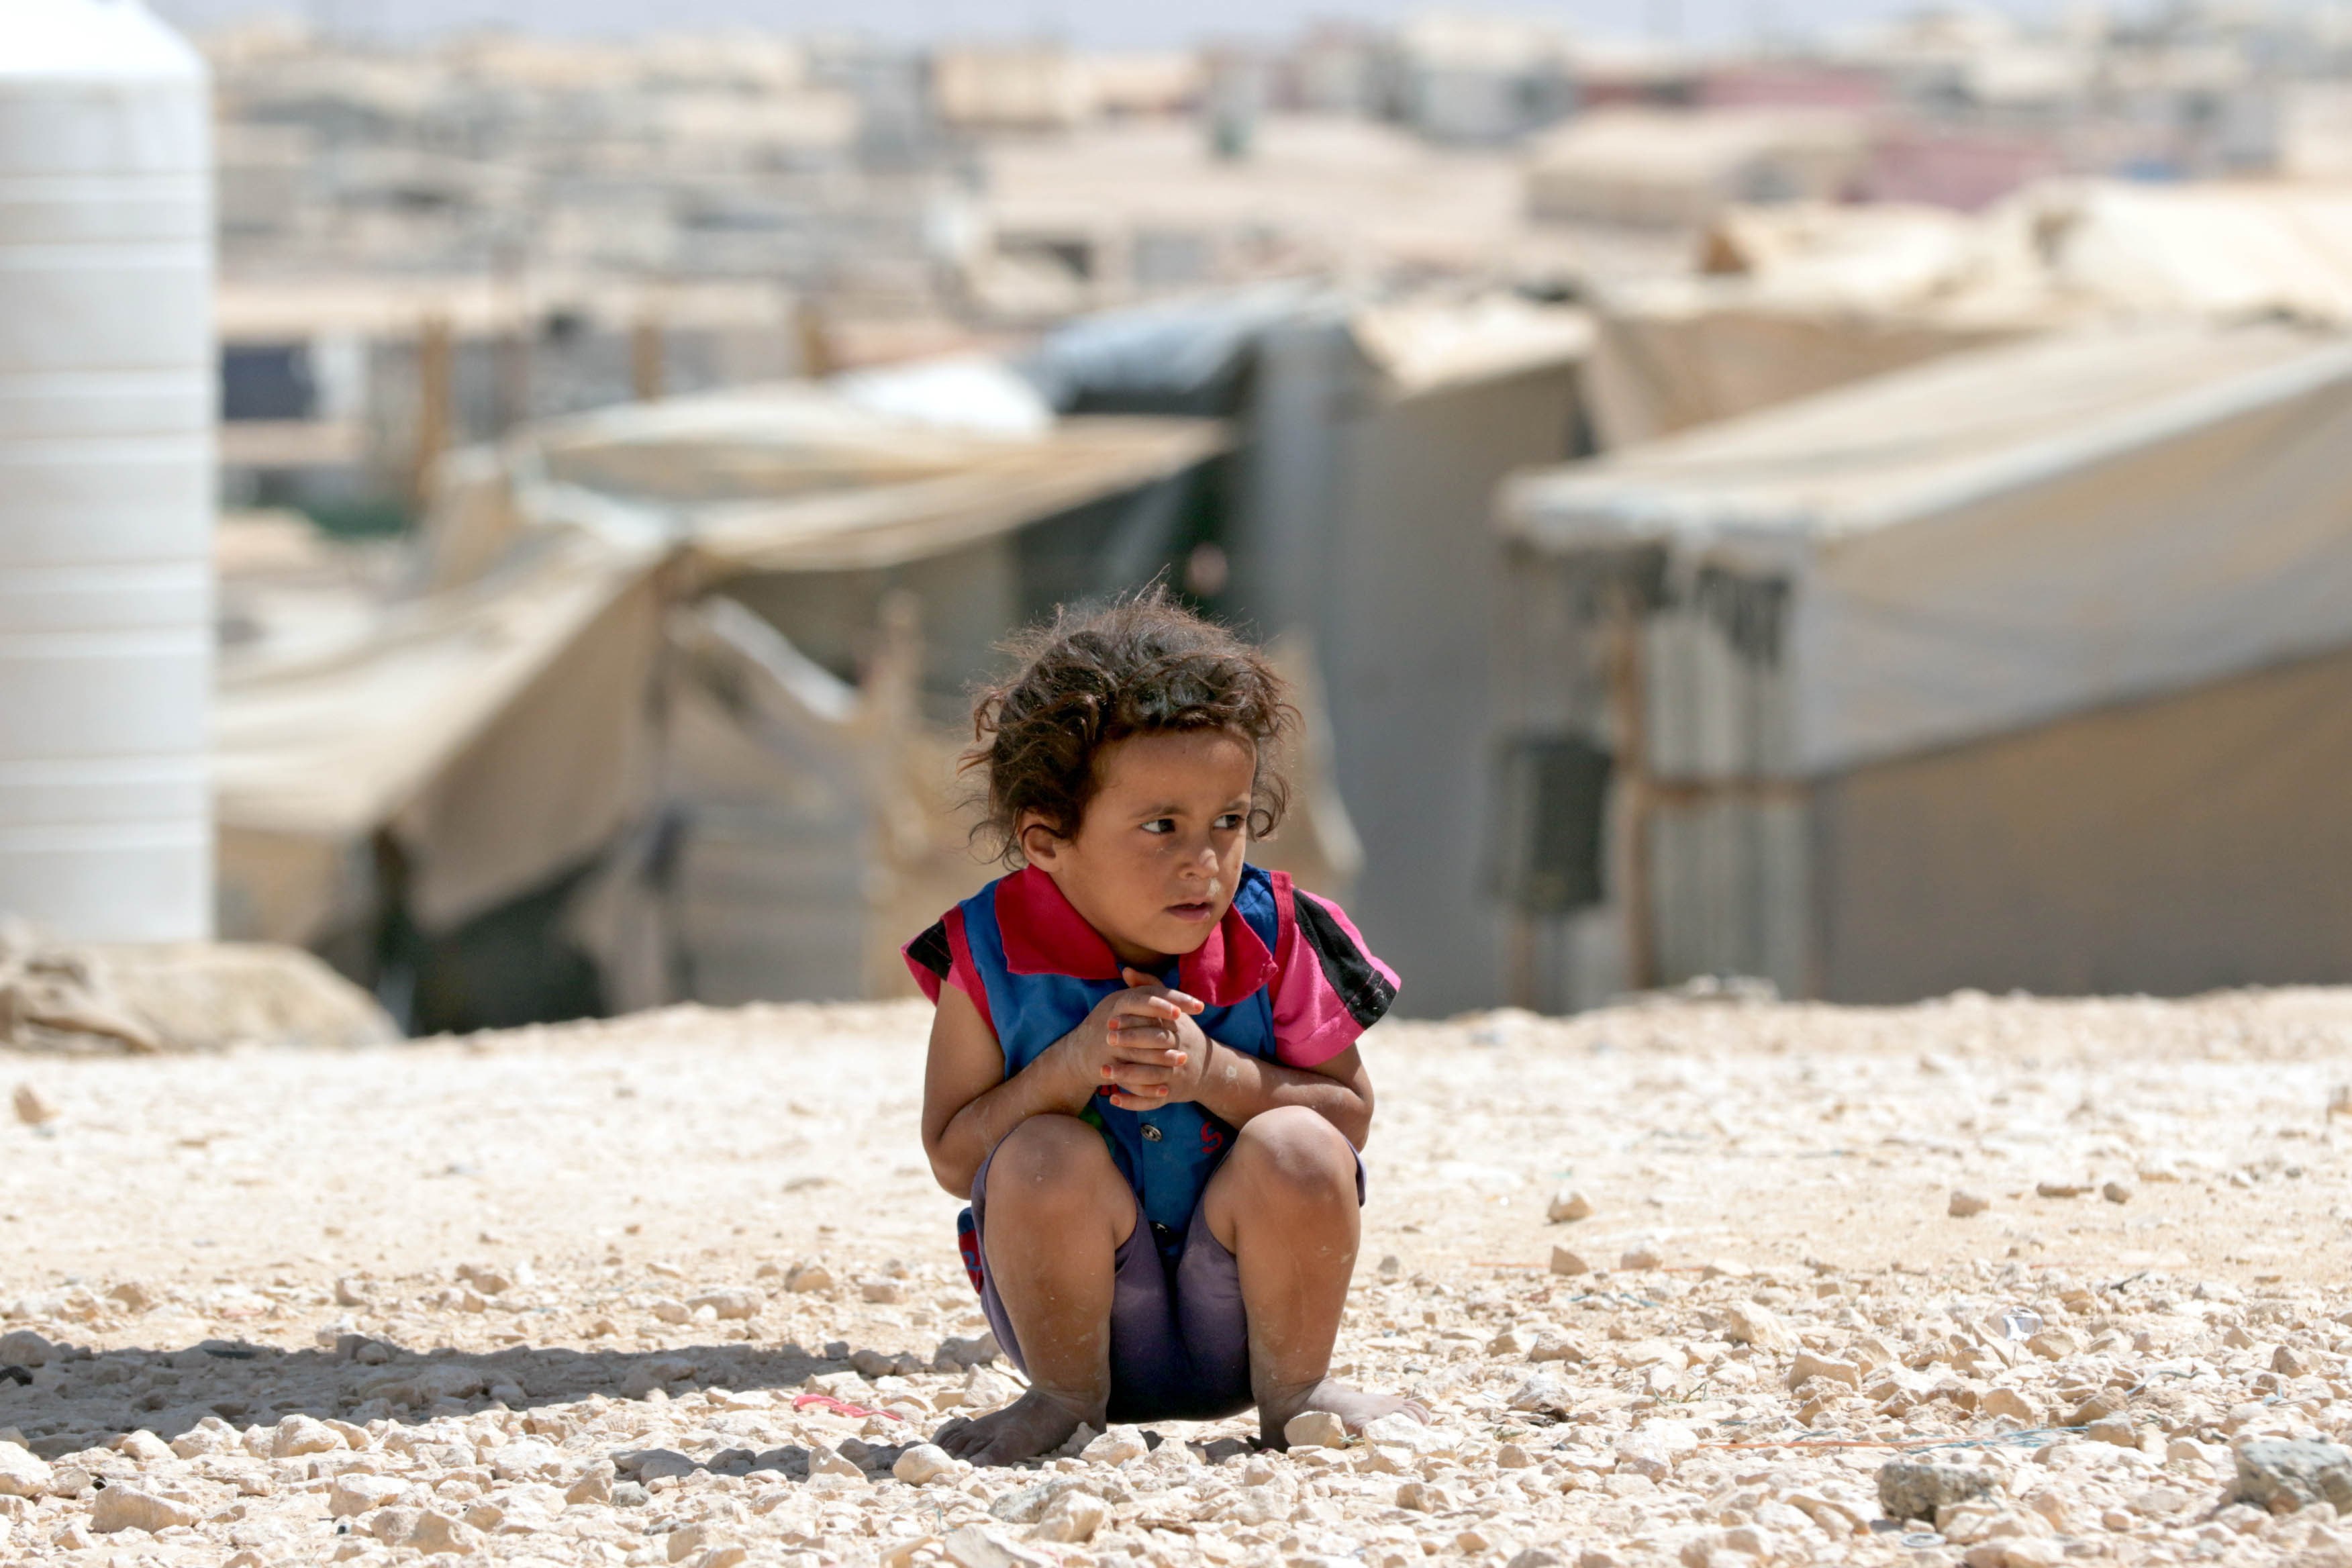 A young Syrian refugee looks on at the UN-run Zaatari camp, north east of the Jordanian capital Amman, on Sept. 19, 2015. (Khalil Mazraawi—AFP/Getty Images)